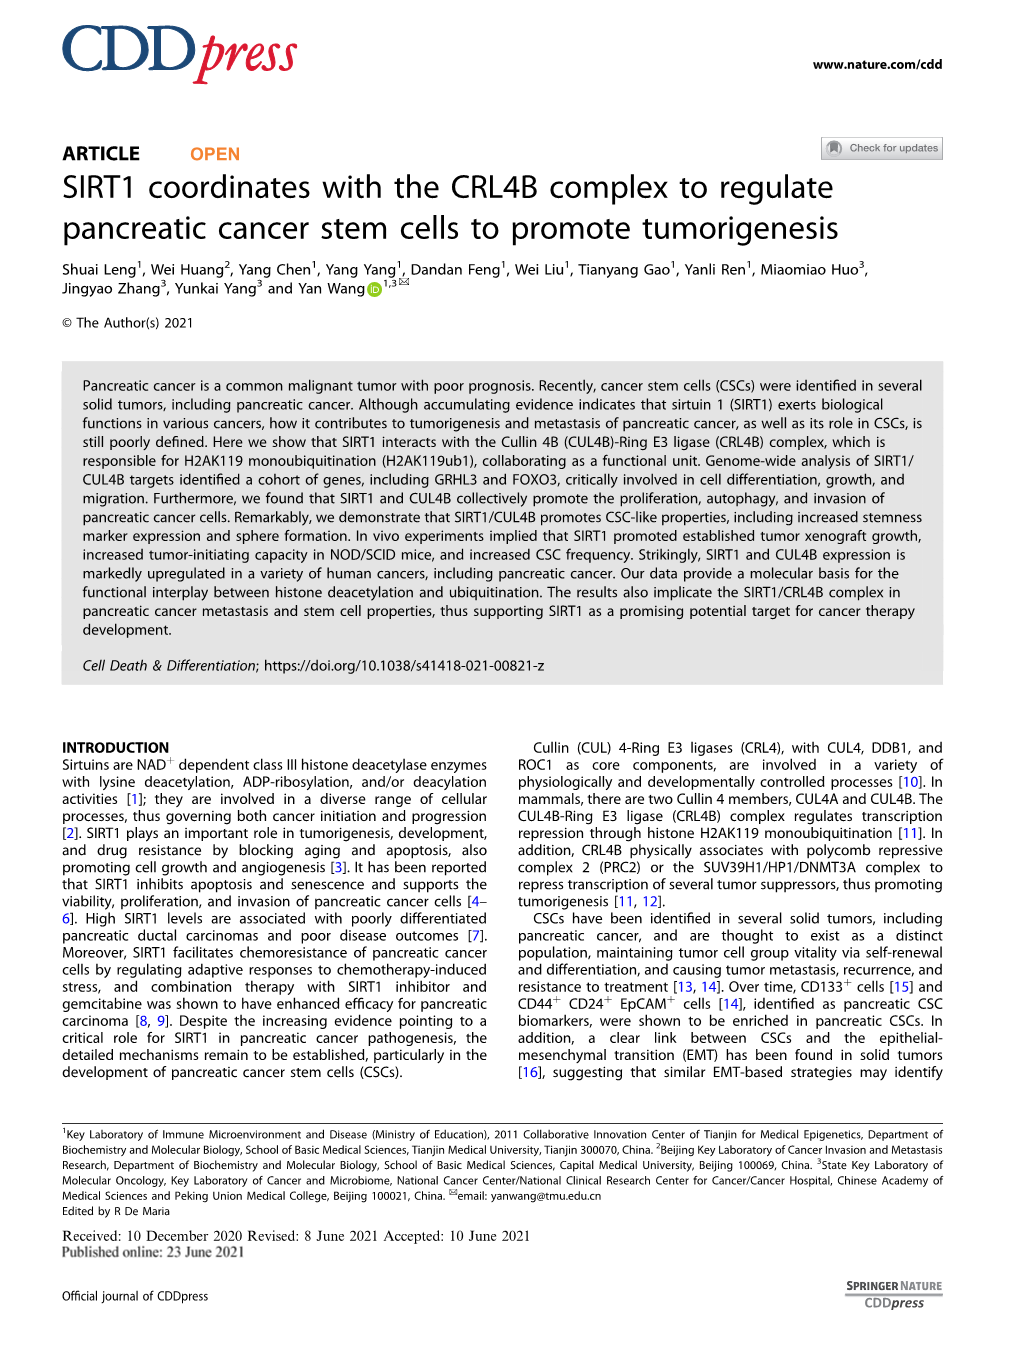 SIRT1 Coordinates with the CRL4B Complex to Regulate Pancreatic Cancer Stem Cells to Promote Tumorigenesis